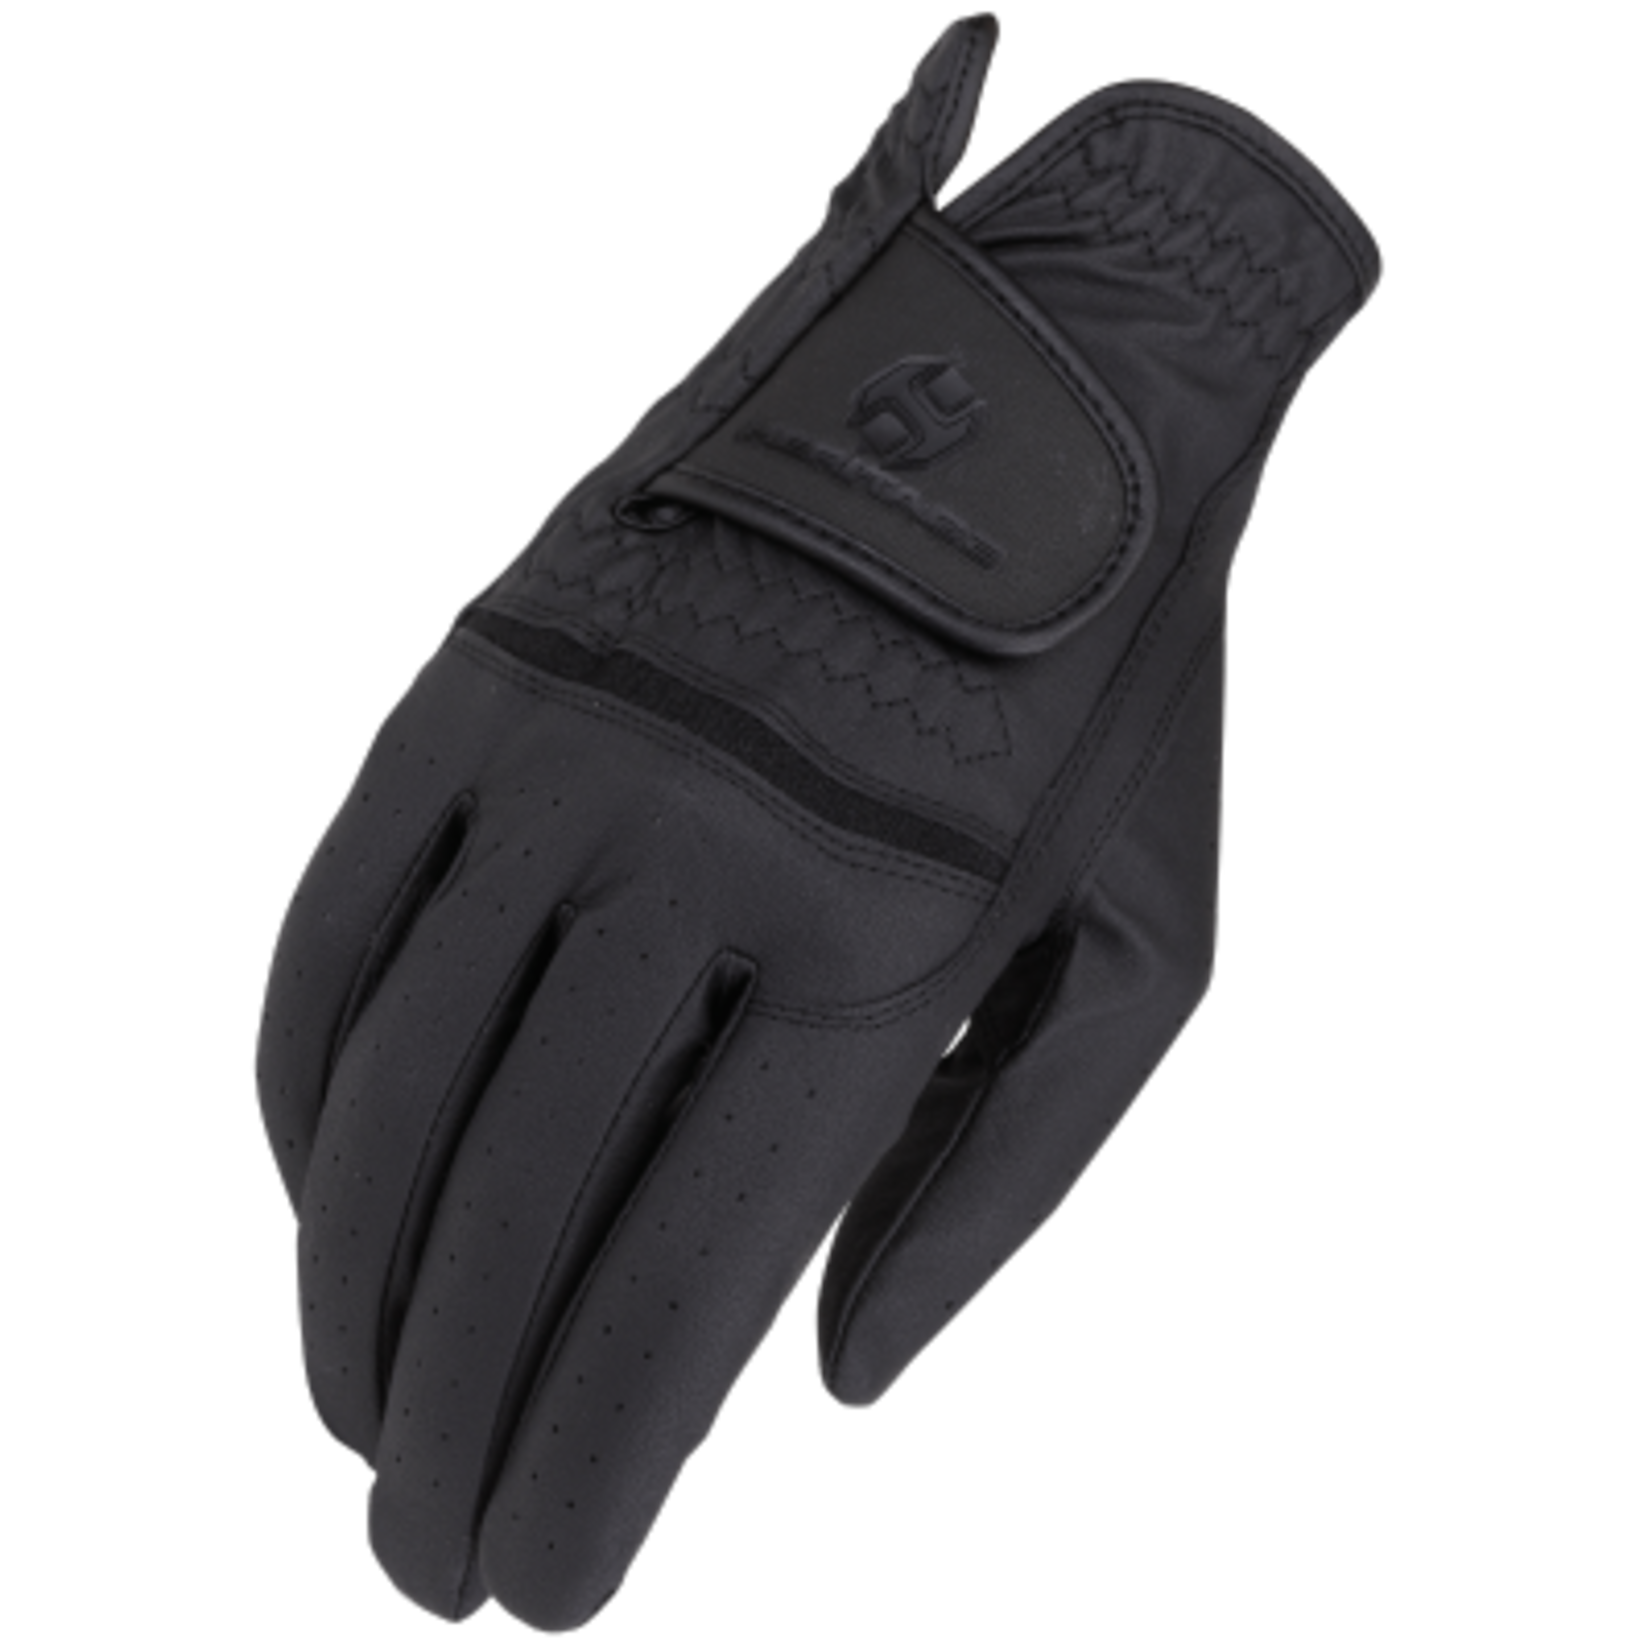 Heritage Products Heritage Premier Show Gloves